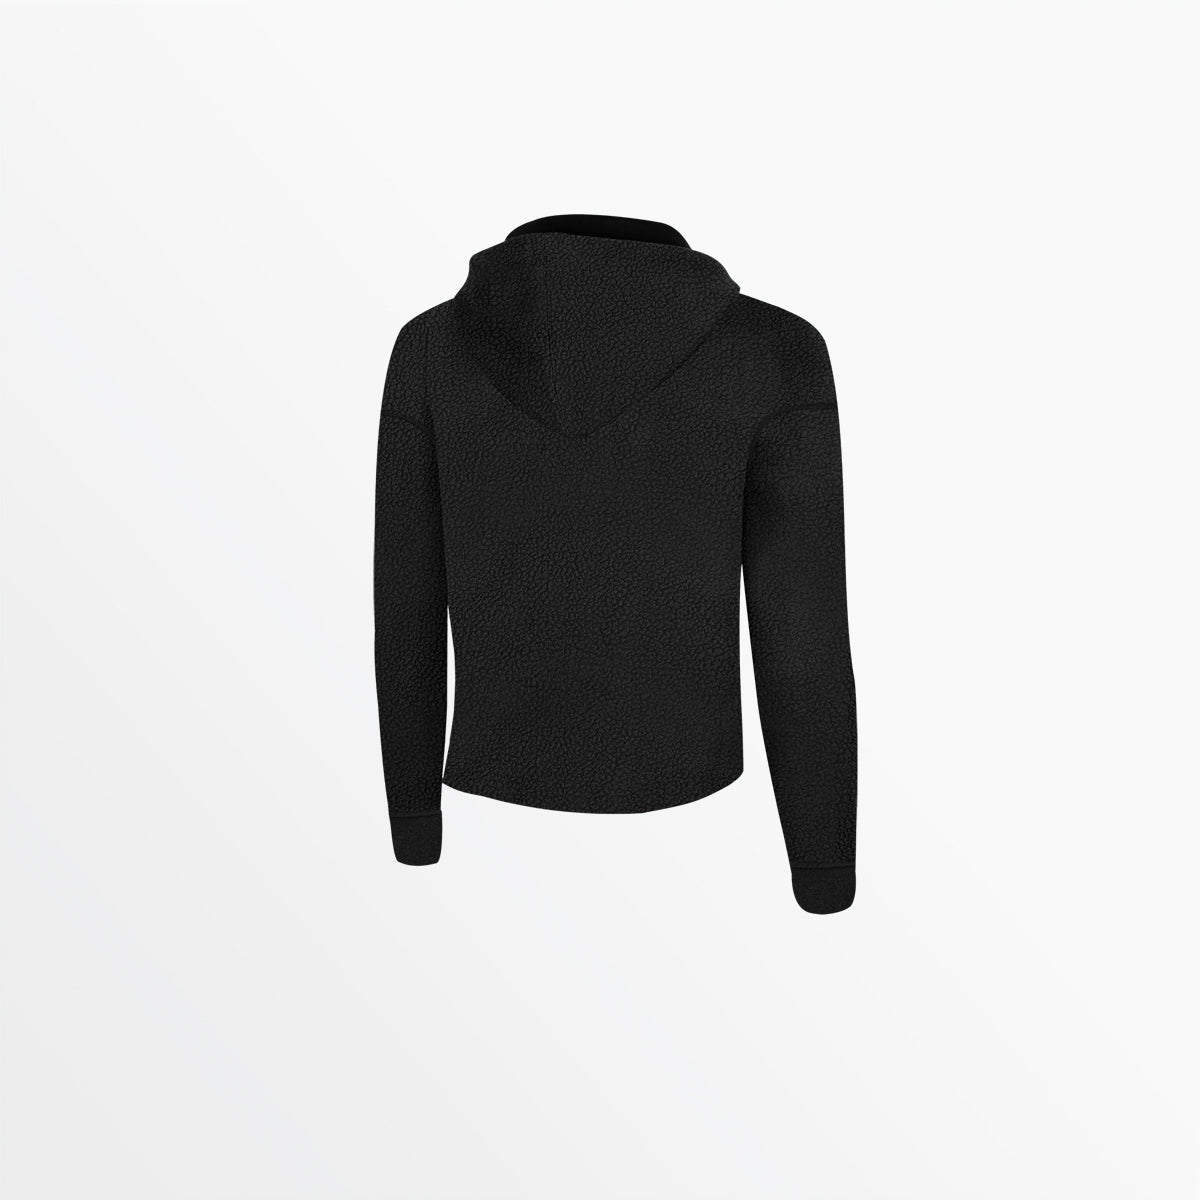 WOMEN'S SHERPA CROPPED PULLOVER HOODIE – capellisport.com